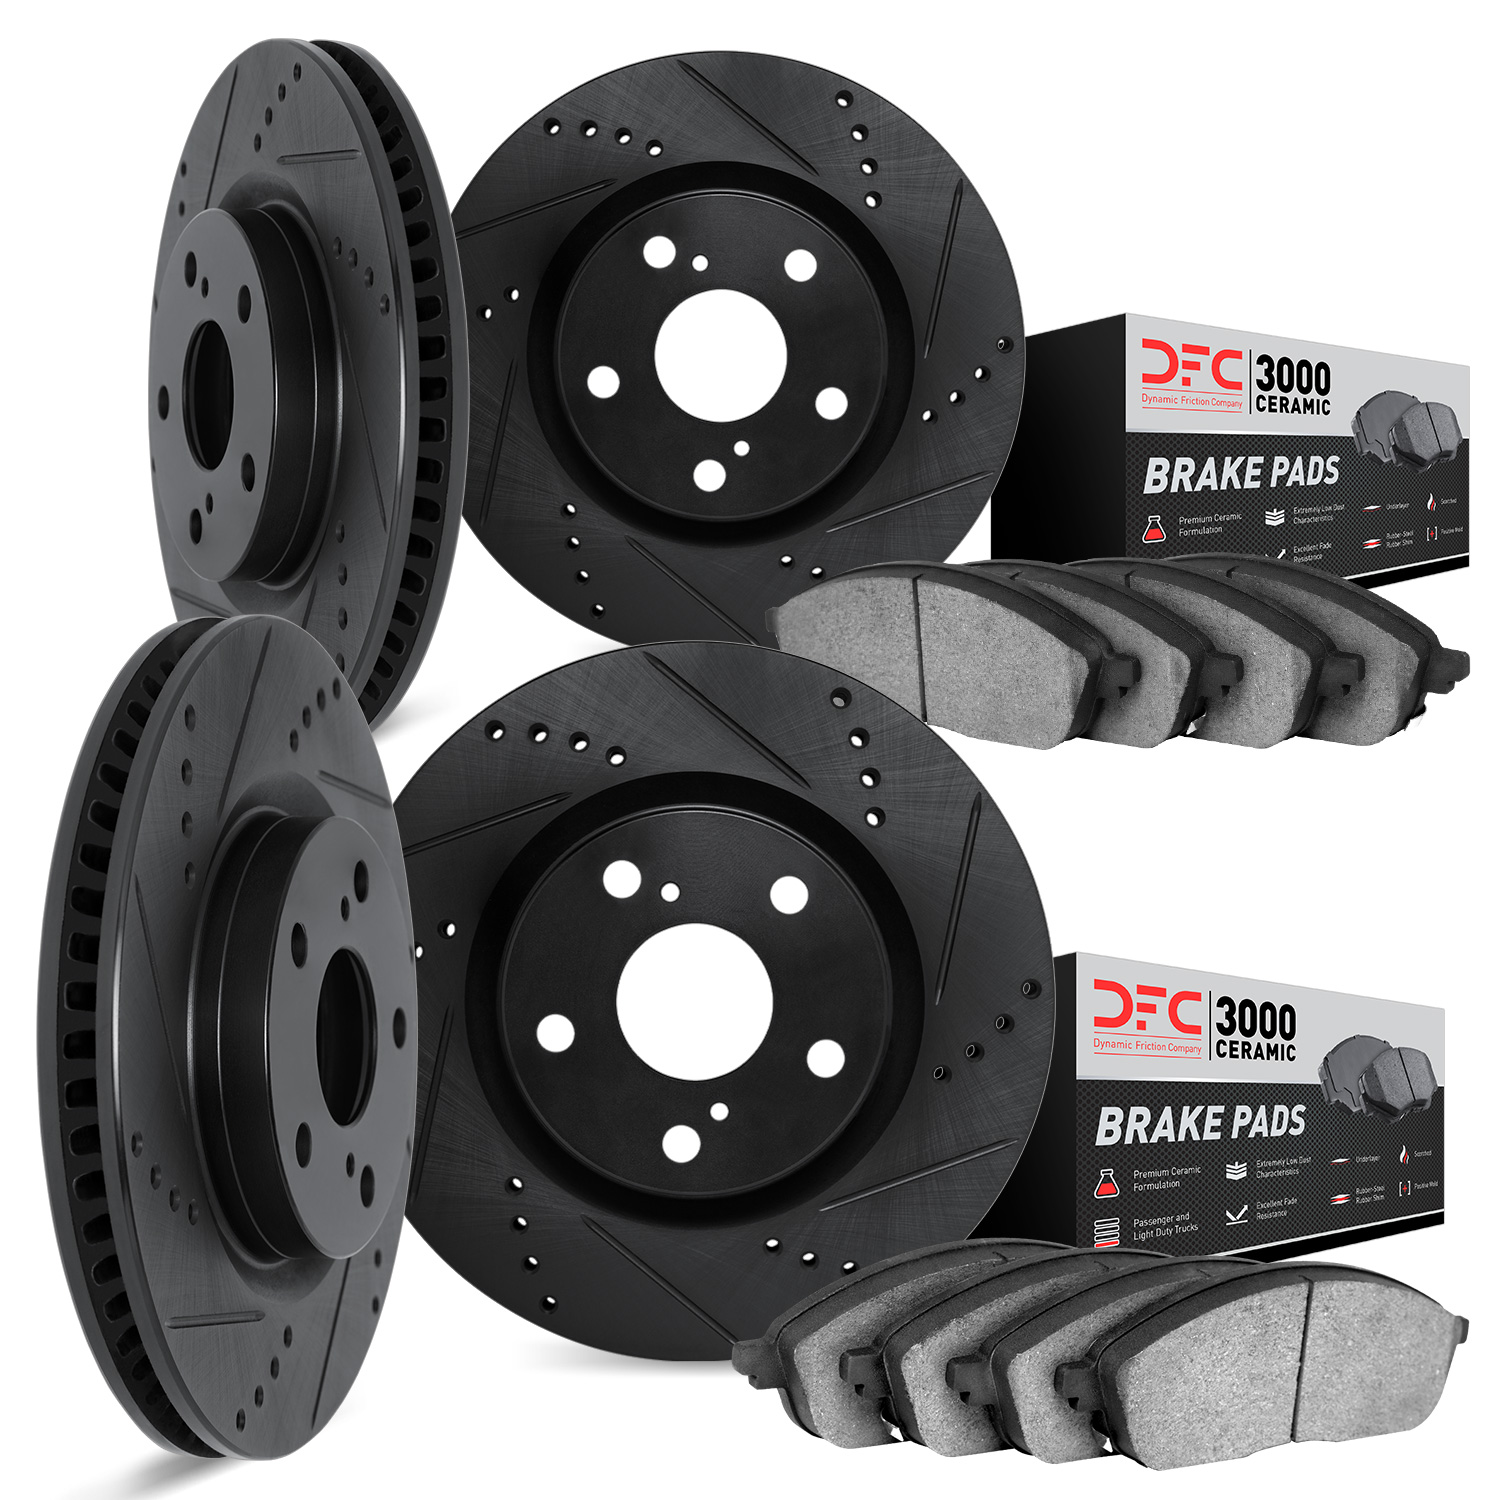 8304-31068 Drilled/Slotted Brake Rotors with 3000-Series Ceramic Brake Pads Kit [Black], 2007-2010 BMW, Position: Front and Rear